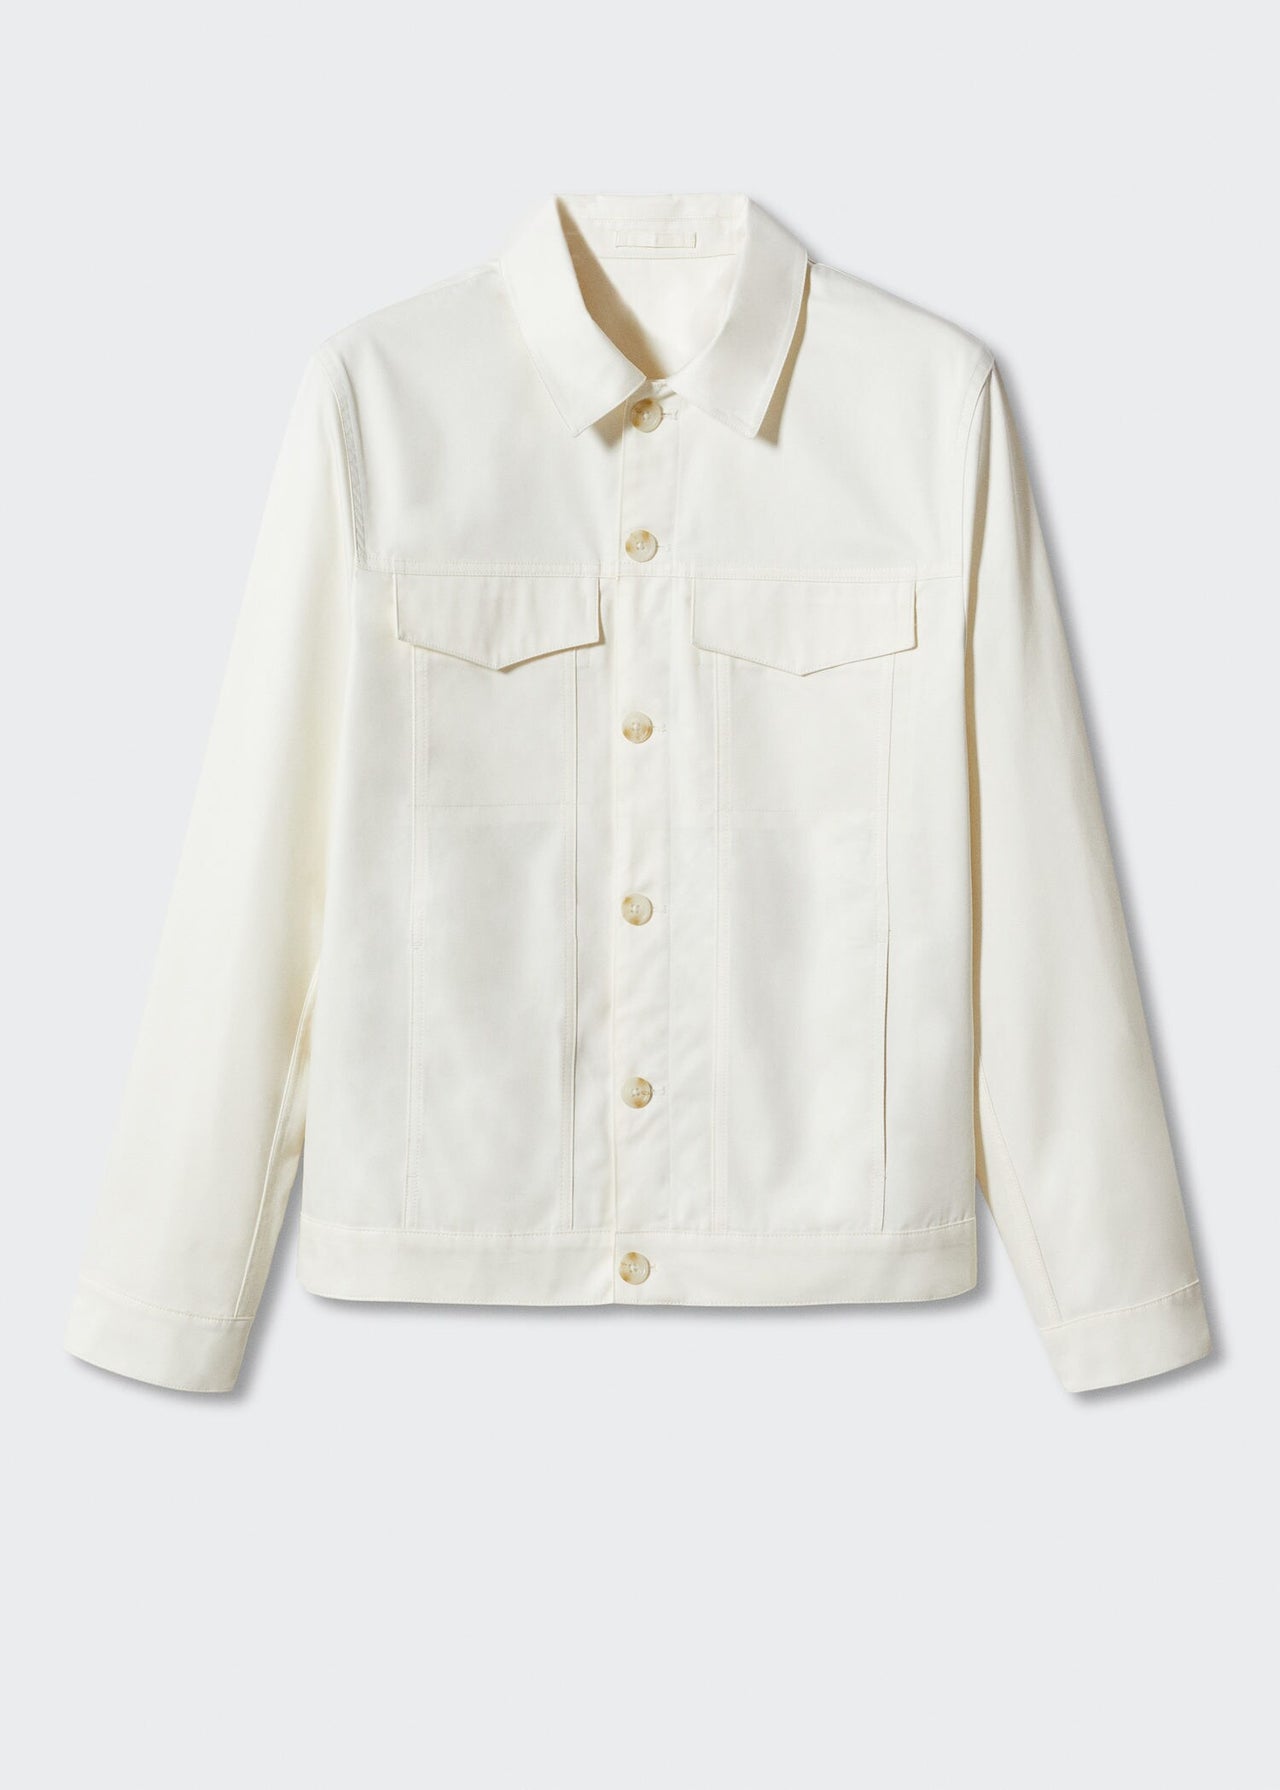 Pocketed cotton jacket